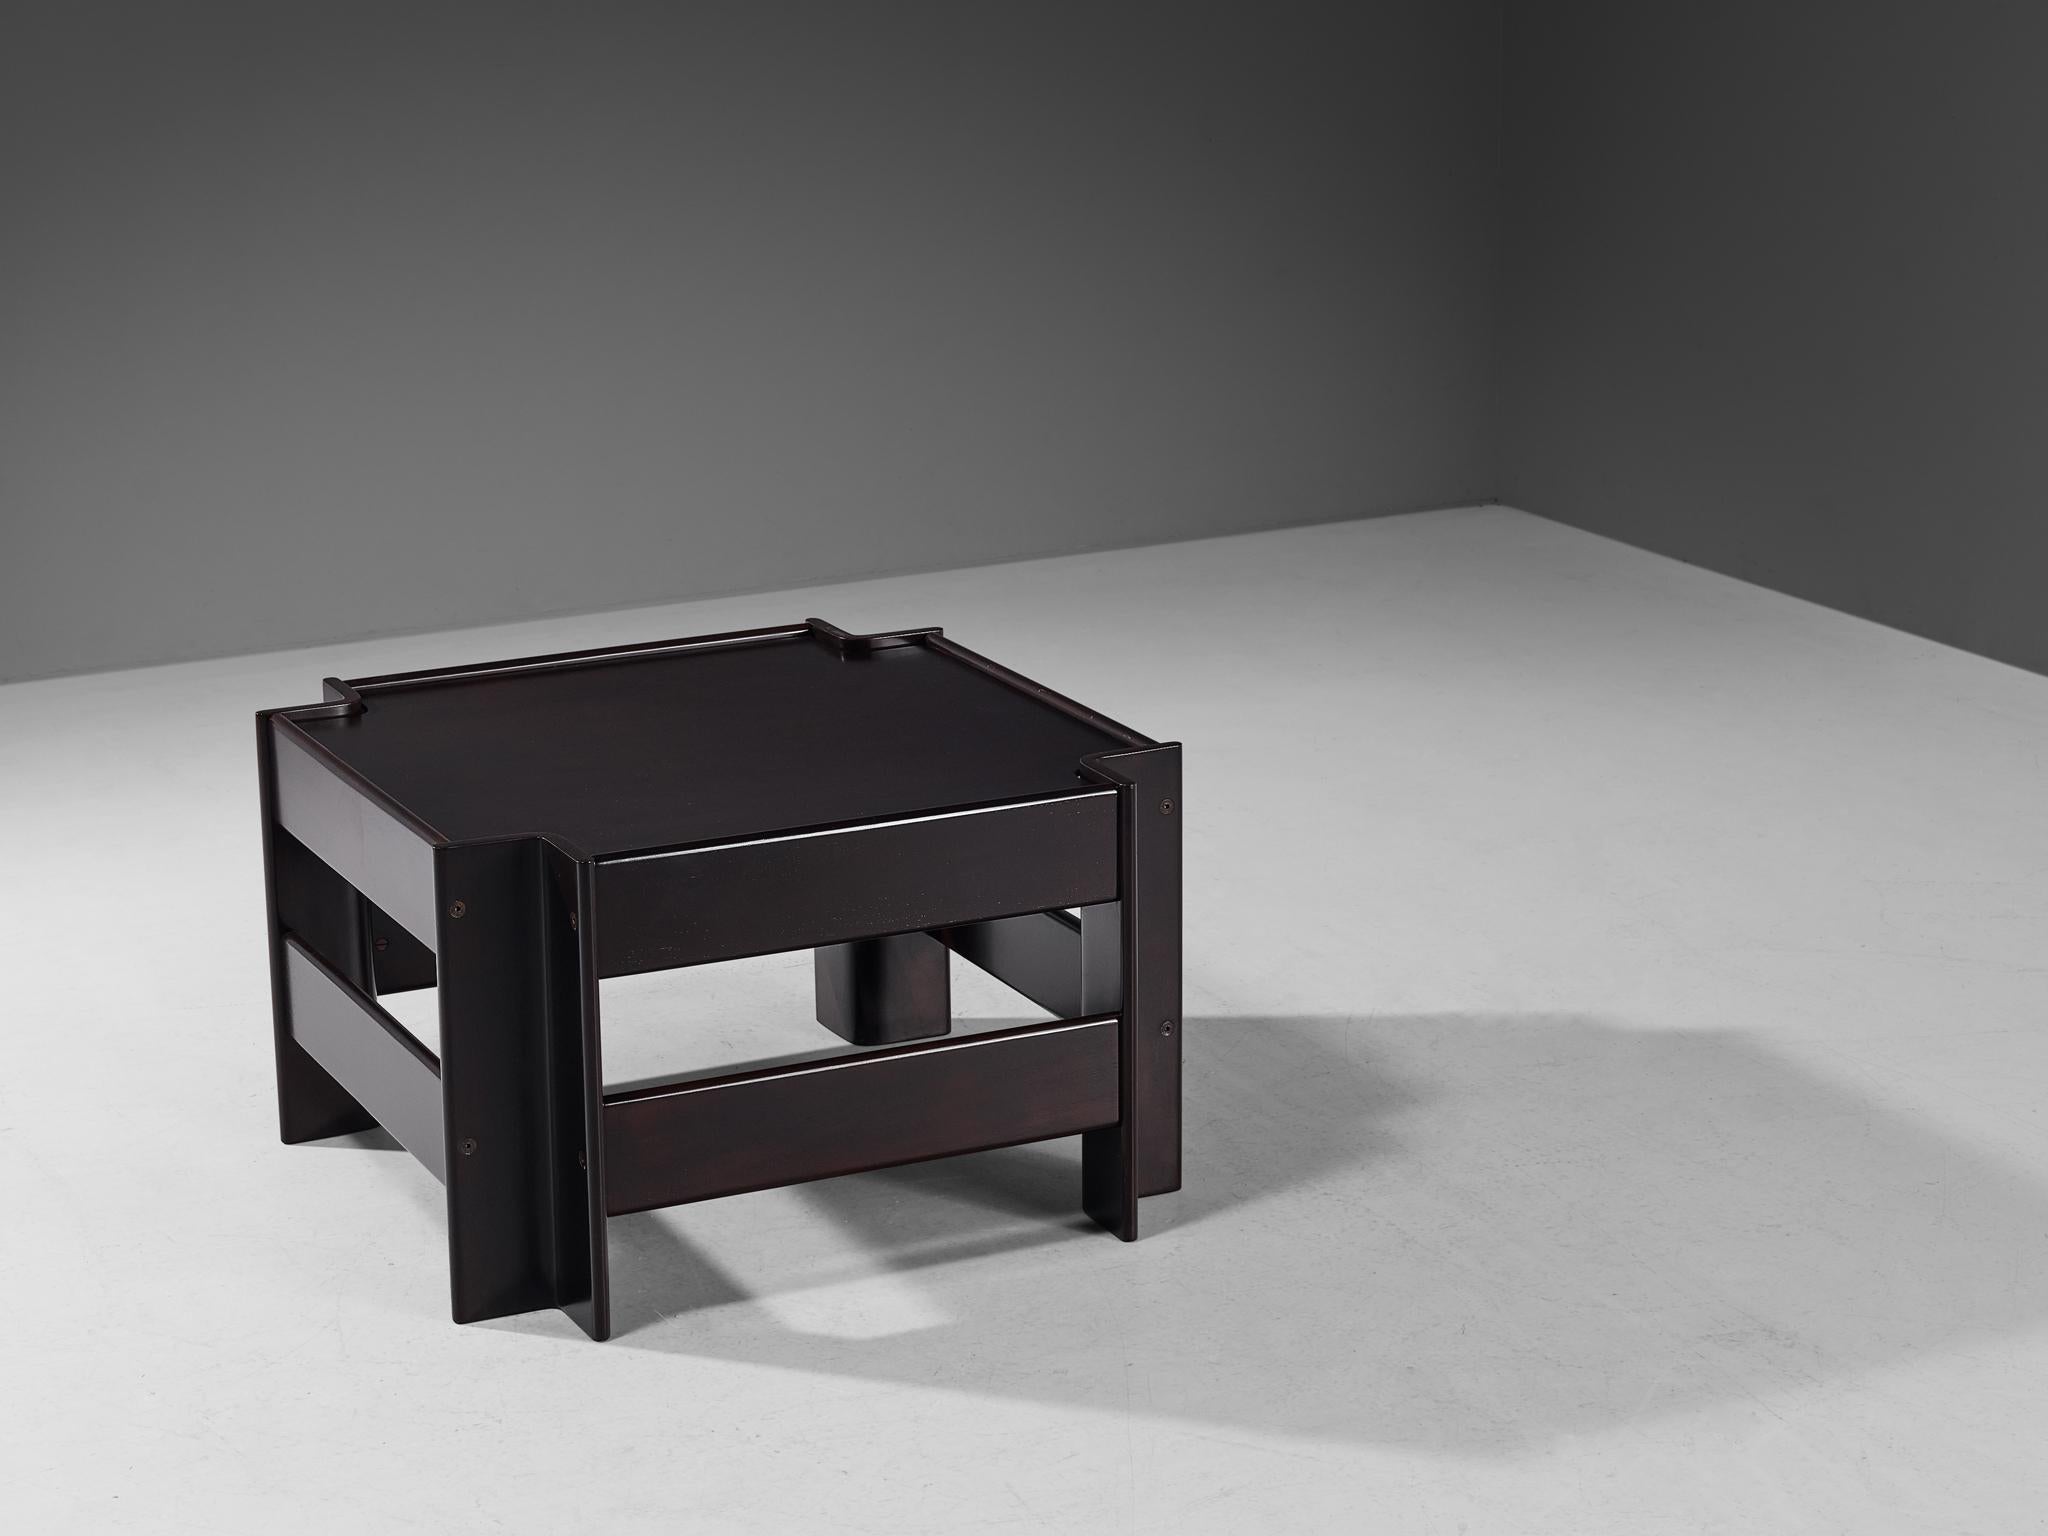 Stained Sergio Asti for Poltronova 'Zelda' Wooden Coffee Table